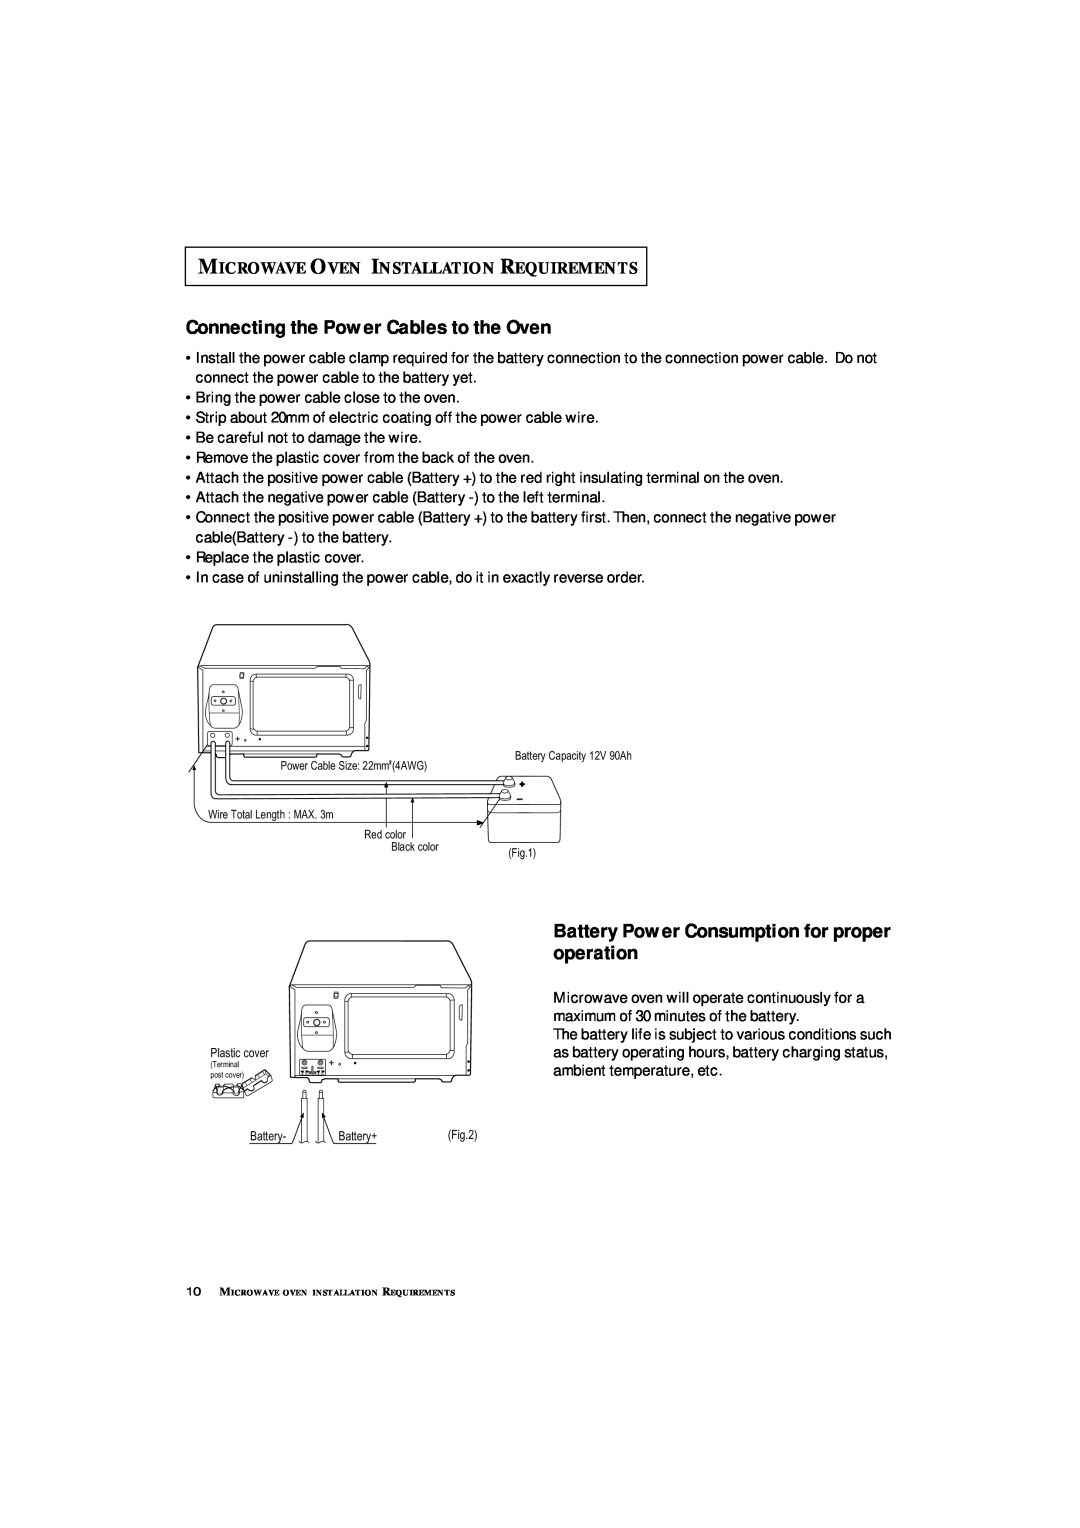 Samsung DE7711 manual Connecting the Power Cables to the Oven, Battery Power Consumption for proper operation 